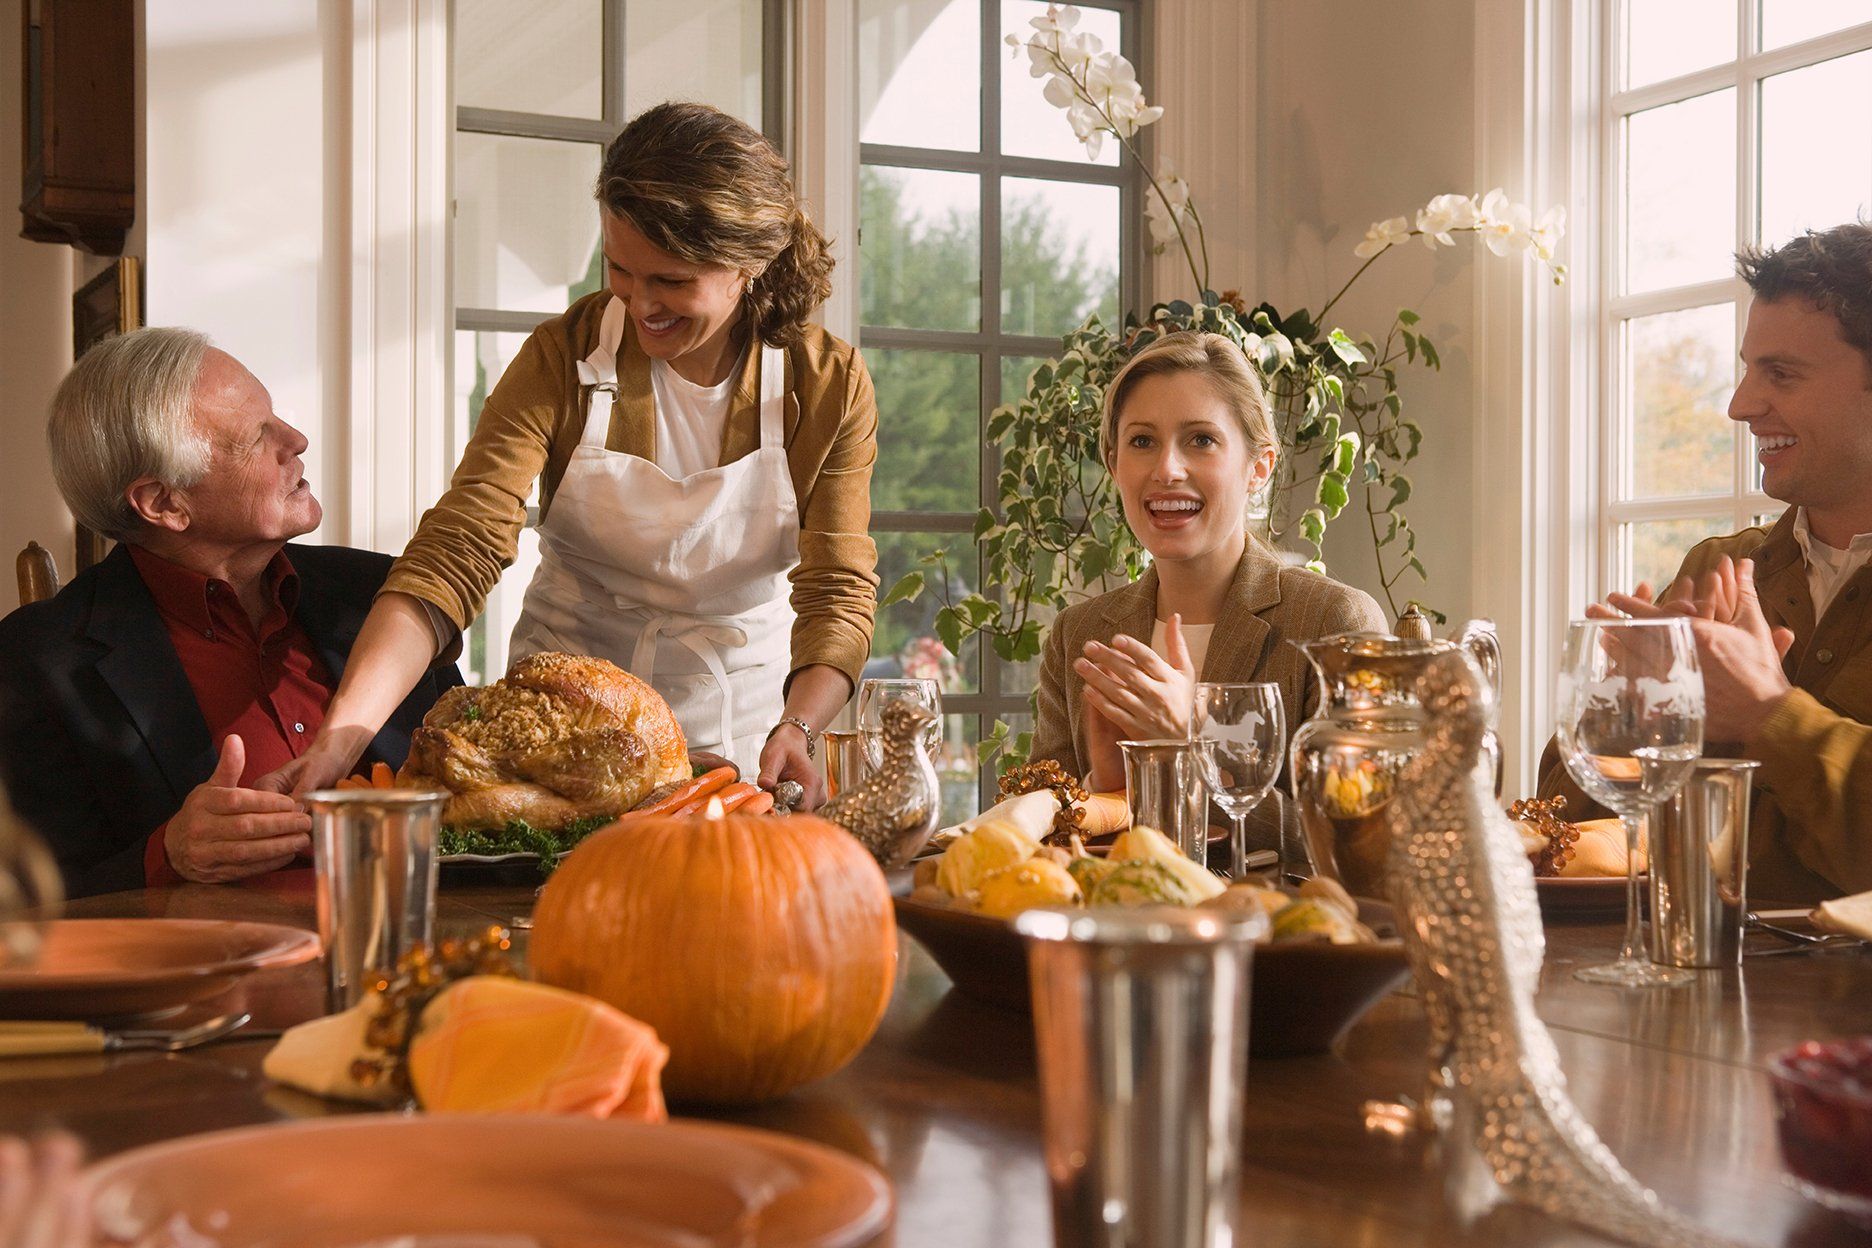 Ideas for Hosting Thanksgiving Dinner in your Manufactured Home With Limited Space